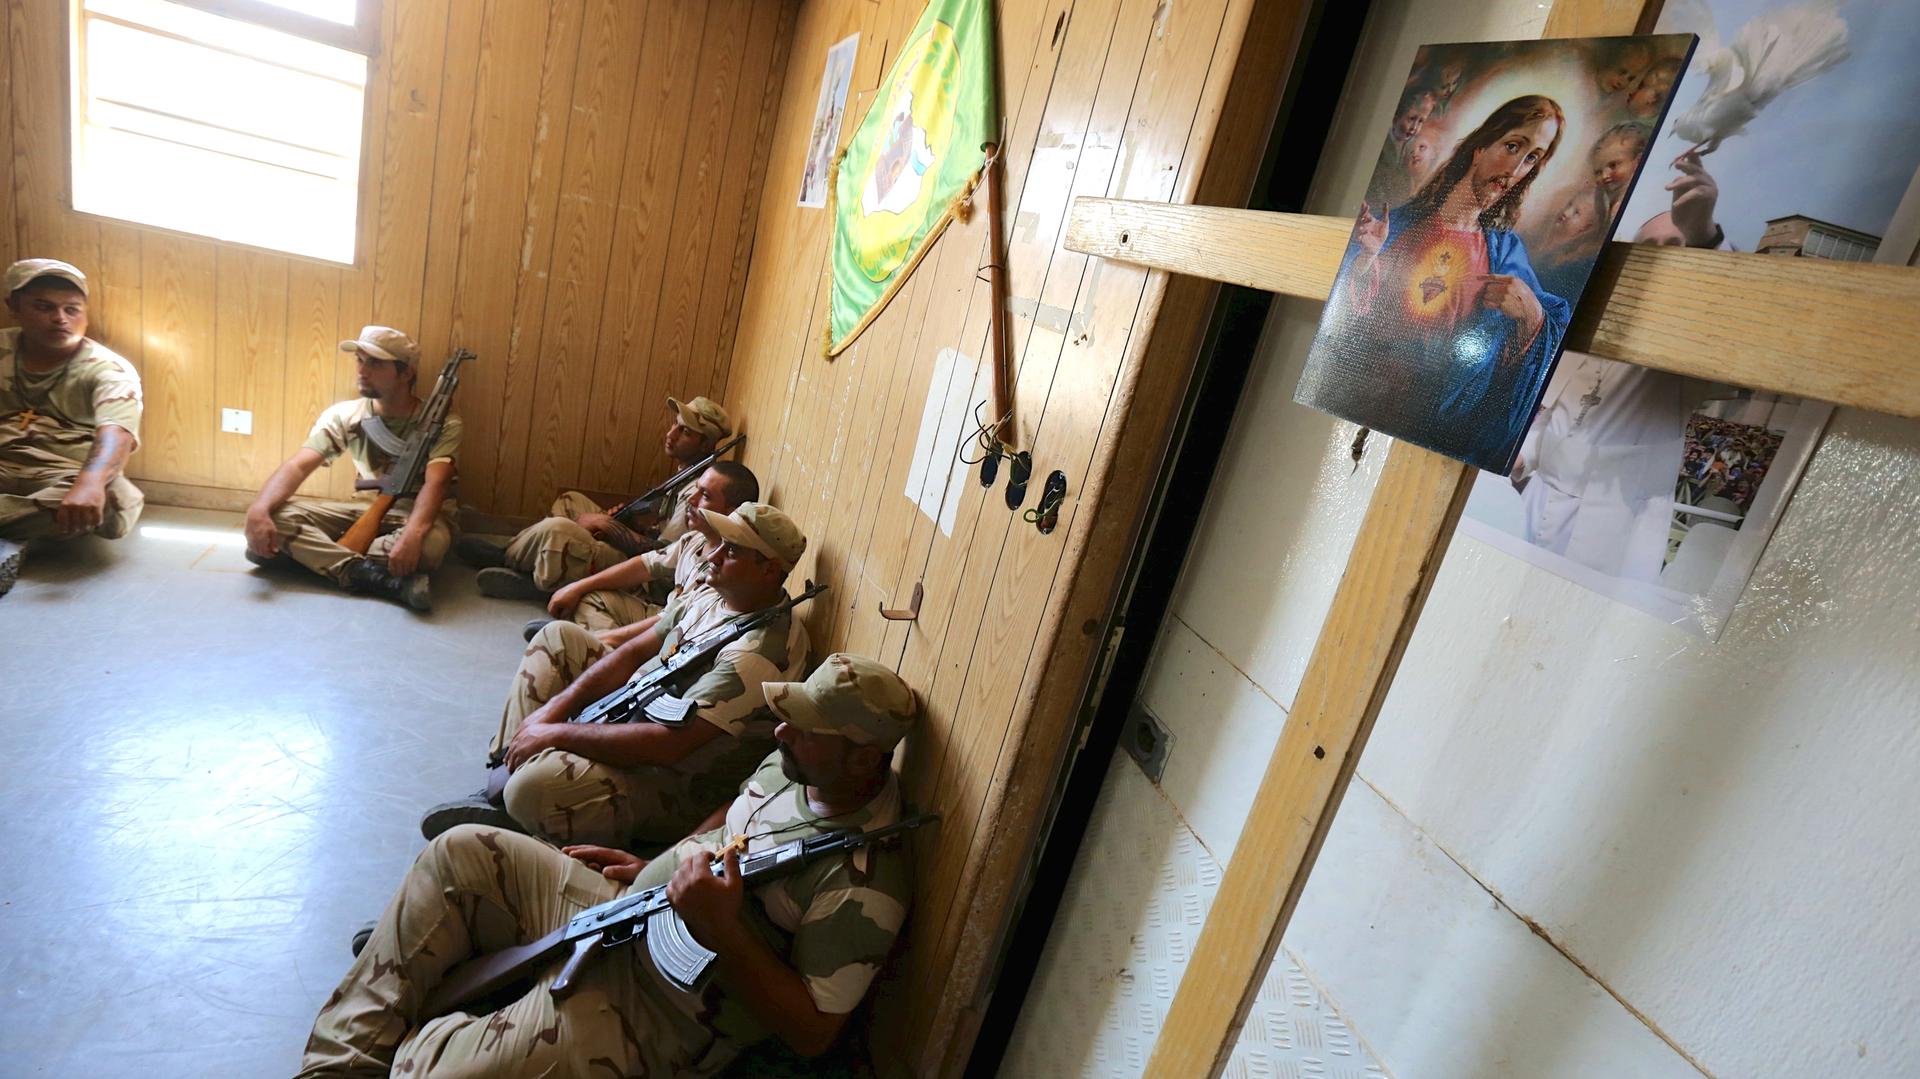 Iraqi Christian volunteers, part of a militia allied with Iraqi military forces against the extremists of ISIS, take a rest during training in a military camp in Baghdad on July 1, 2015.